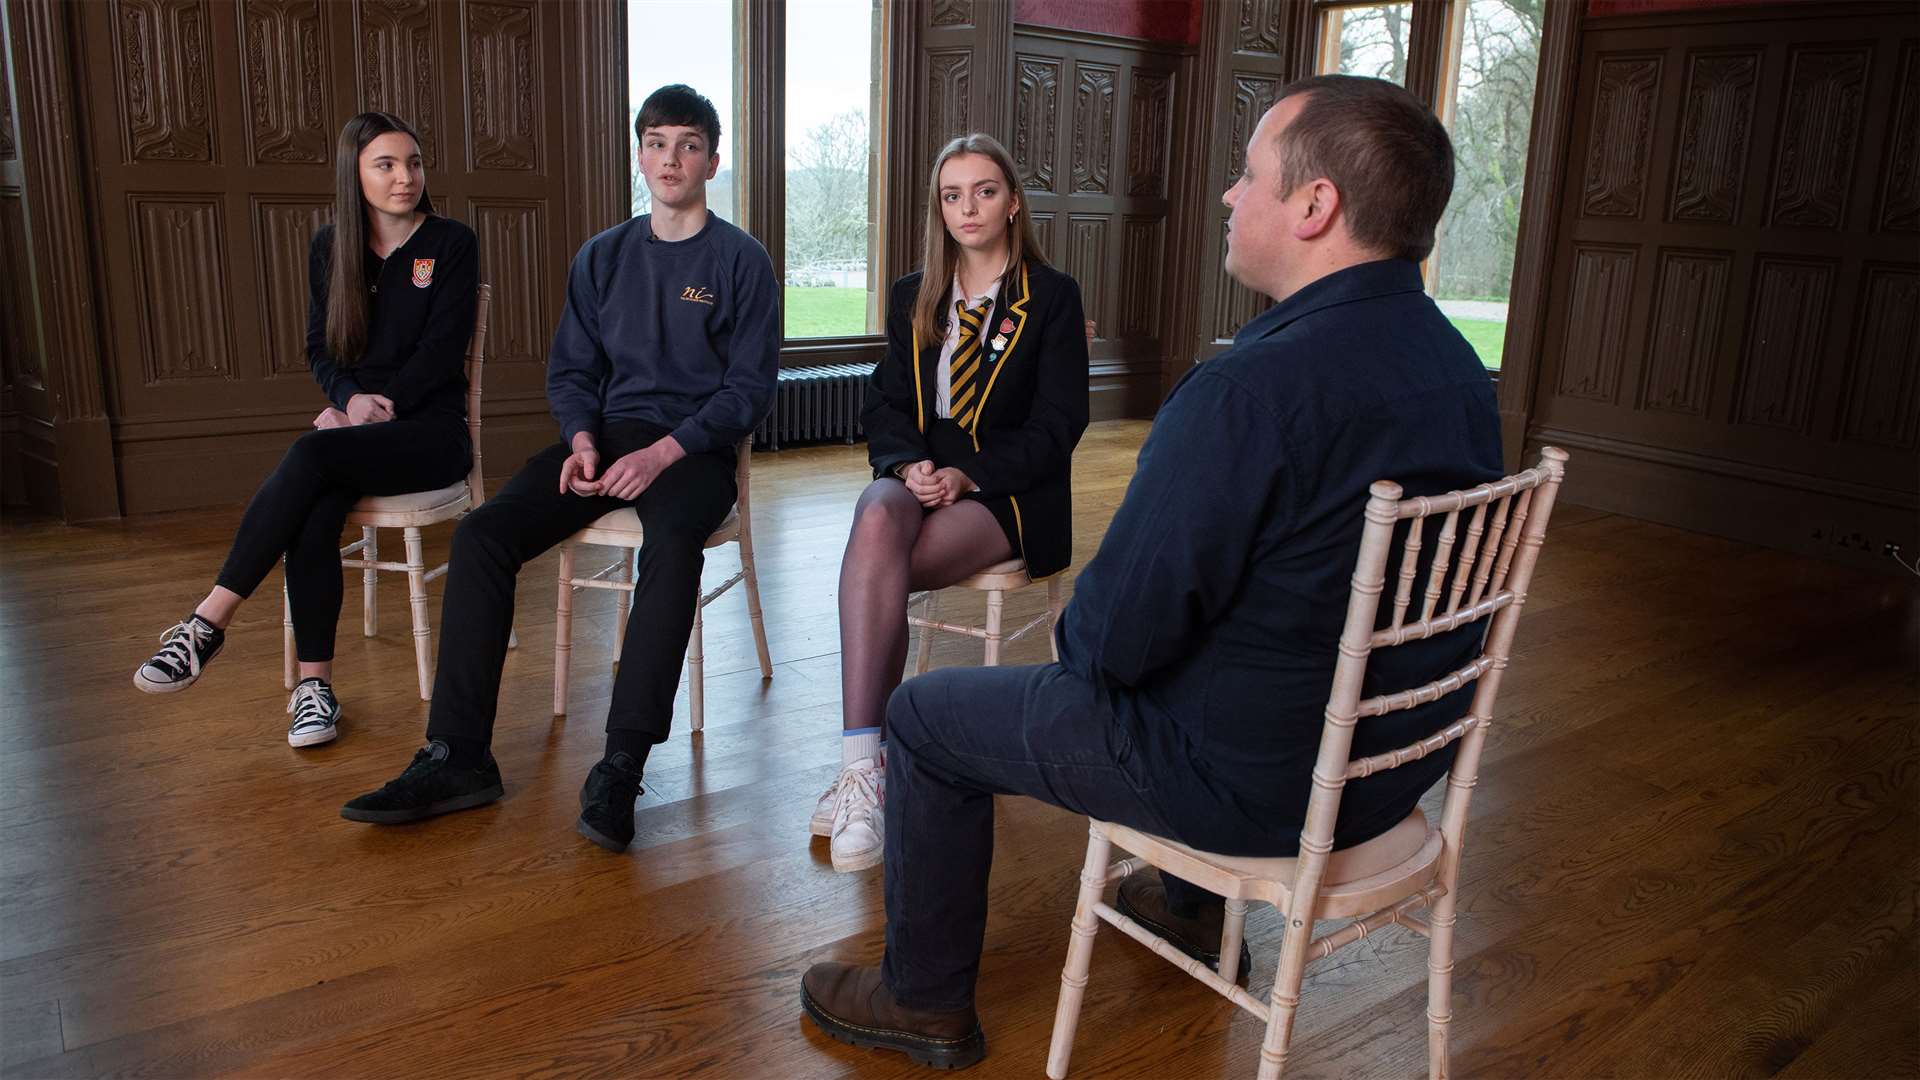 Ruairidh Maciver speaks to current pupils to get their thoughts on the issues surround the beginnings of the school.